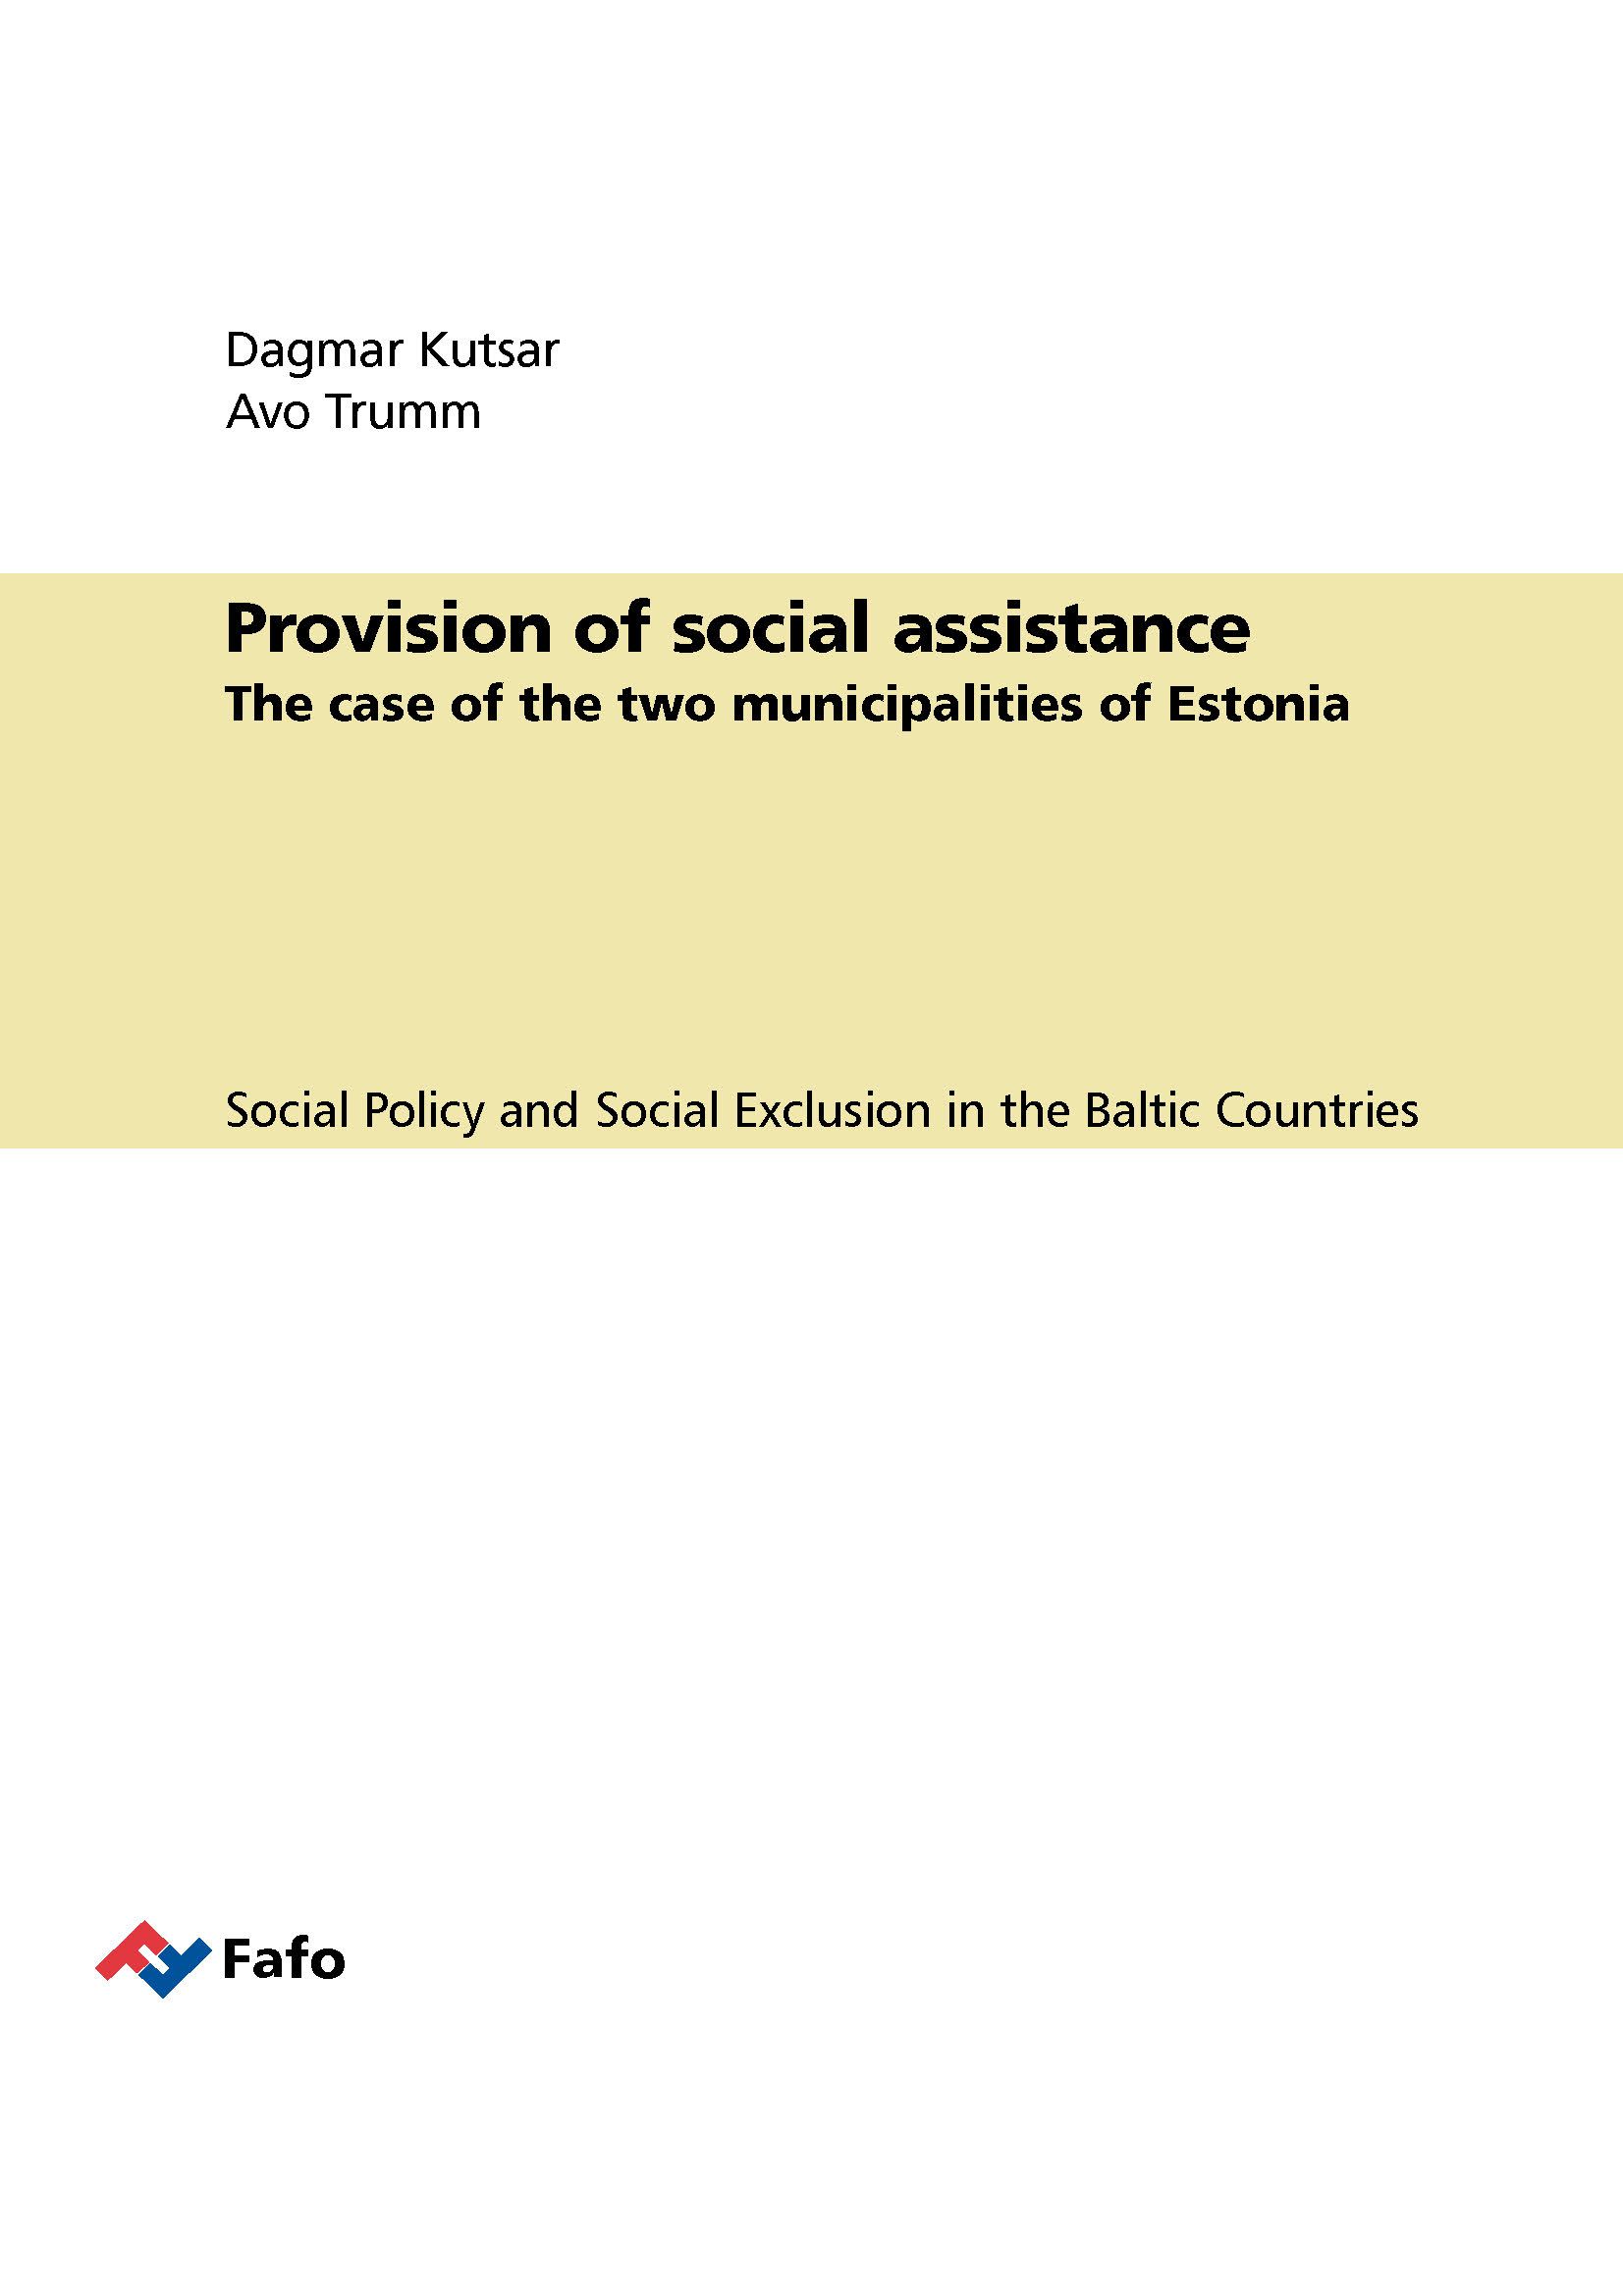 Provision of social assistance